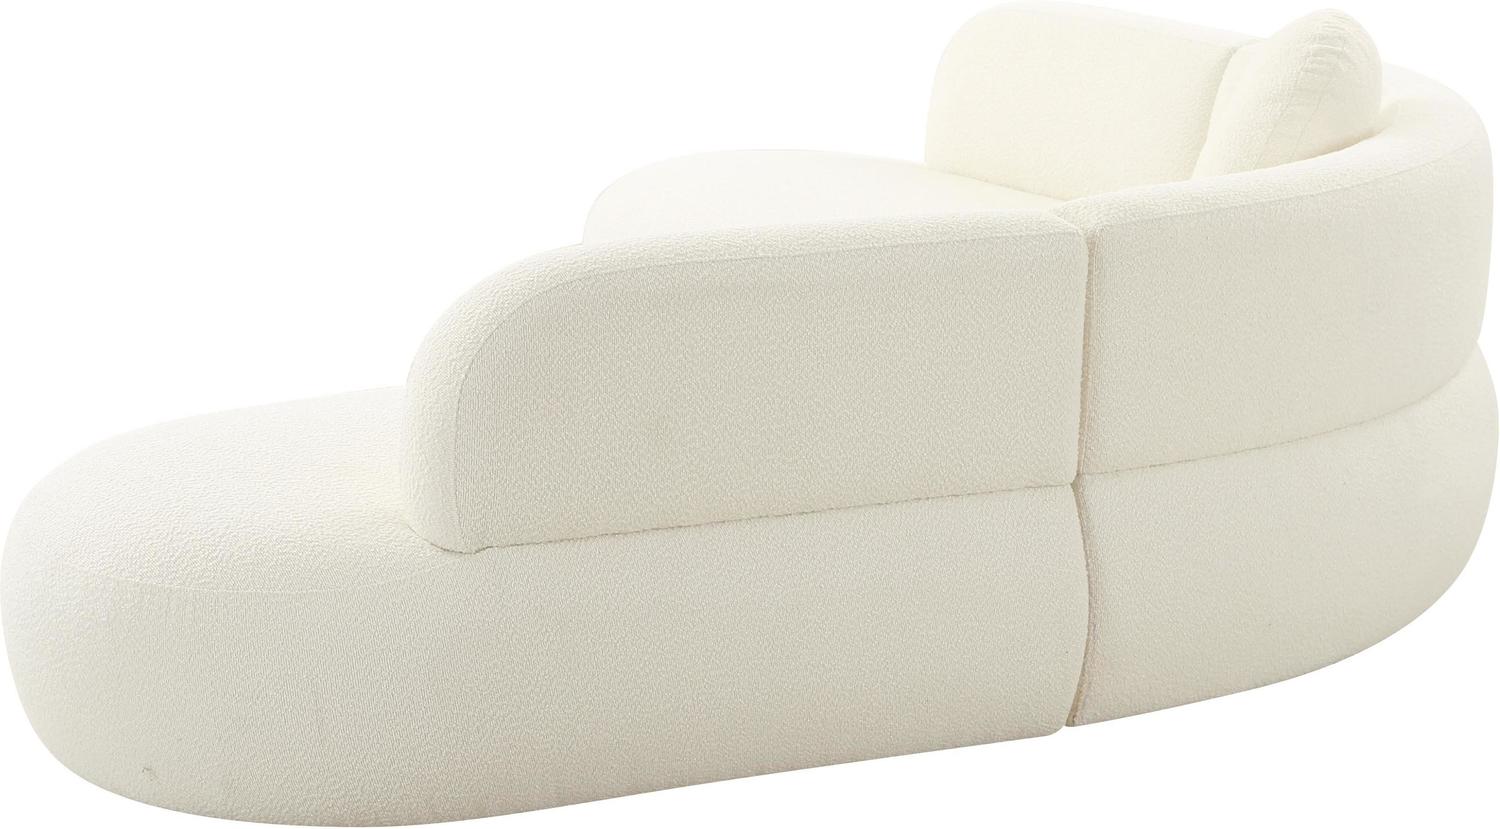 mid century sofa with chaise Tov Furniture Sectionals Cream